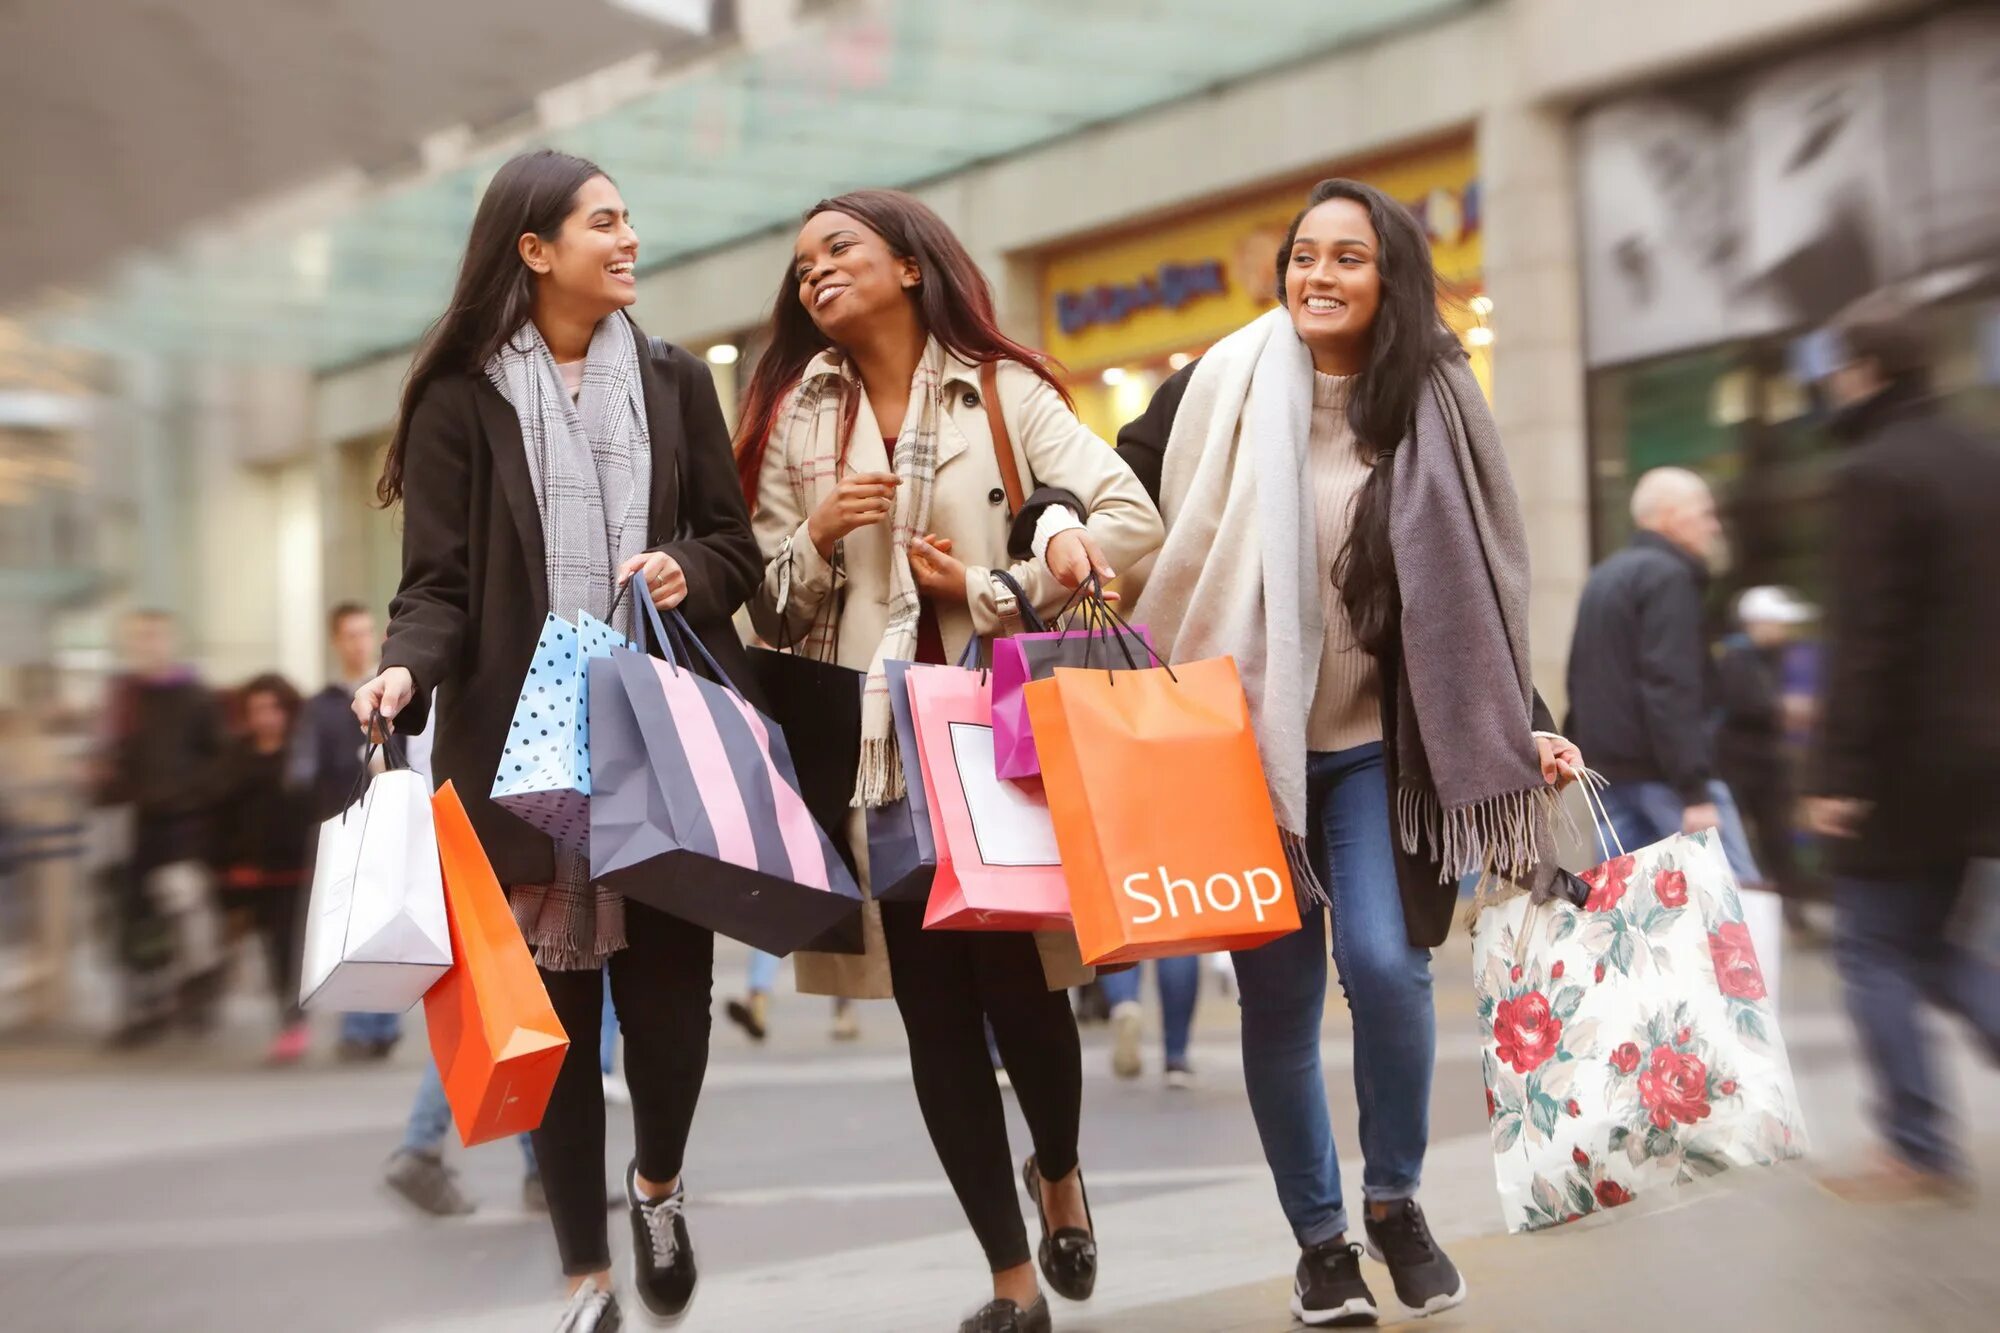 We go shopping now. 1- She’ll go shopping in Town …. Consumer confidence.